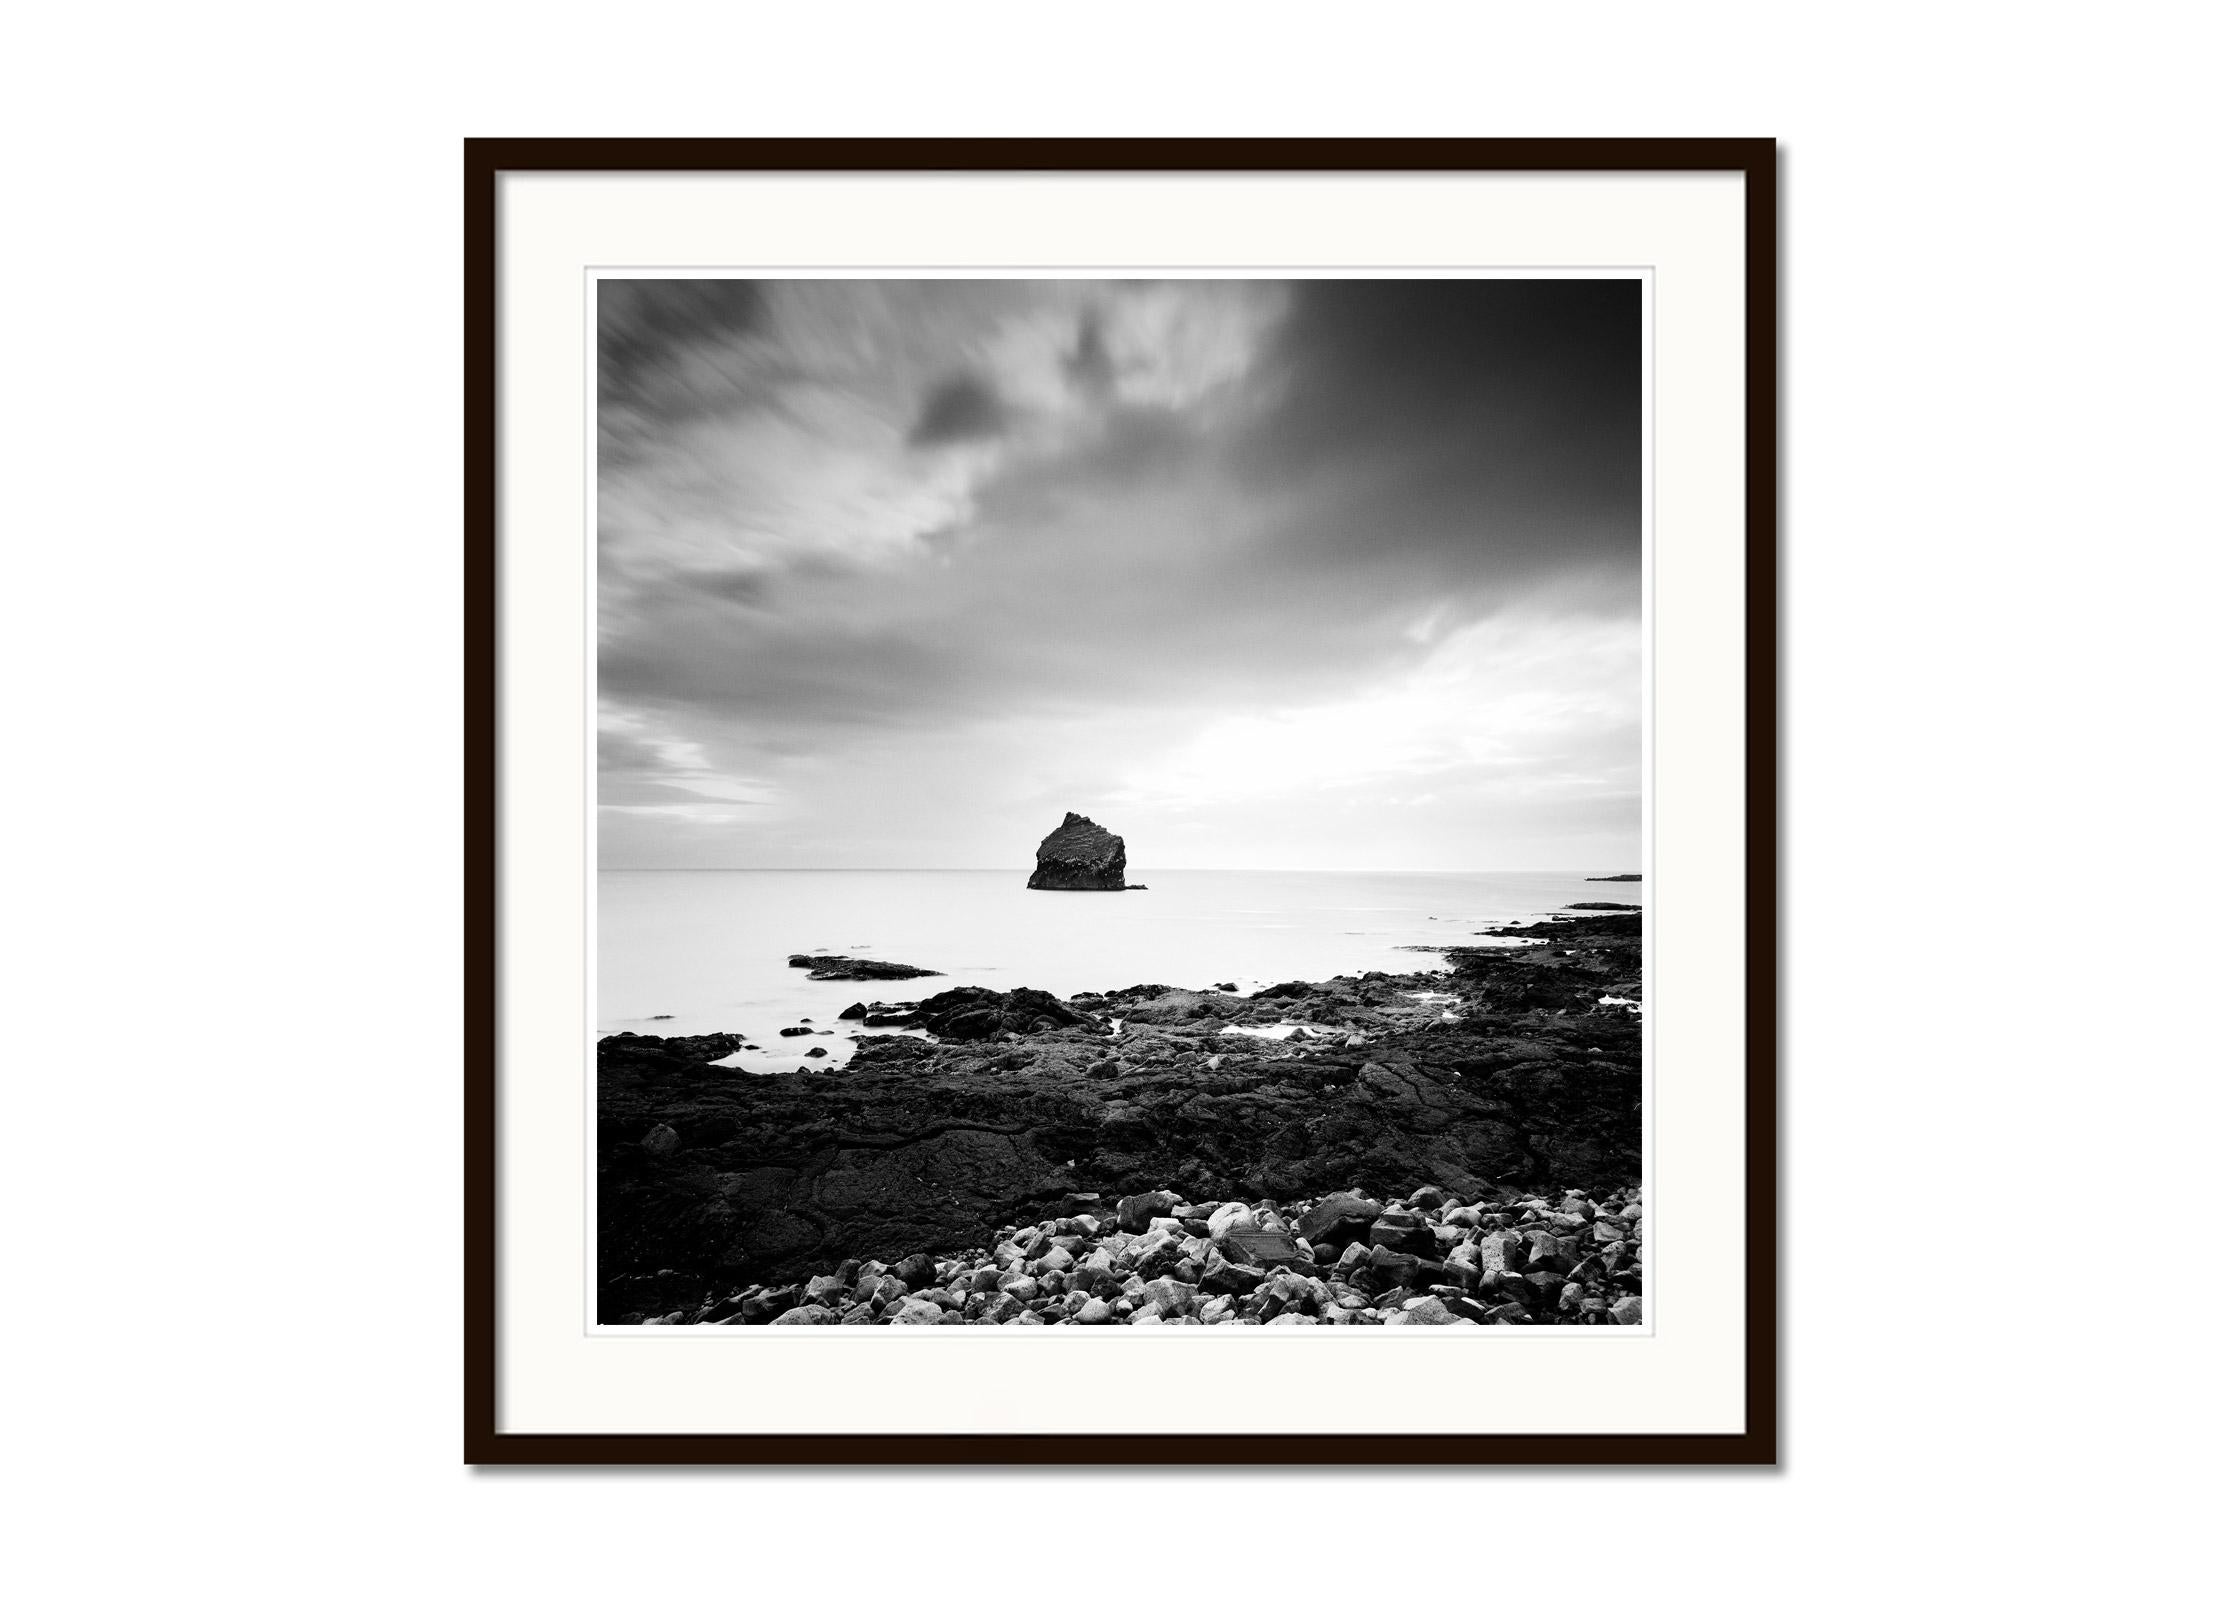 Reykjanes, Black Lava Beach, Iceland, Black and White landscape art photography - Gray Black and White Photograph by Gerald Berghammer